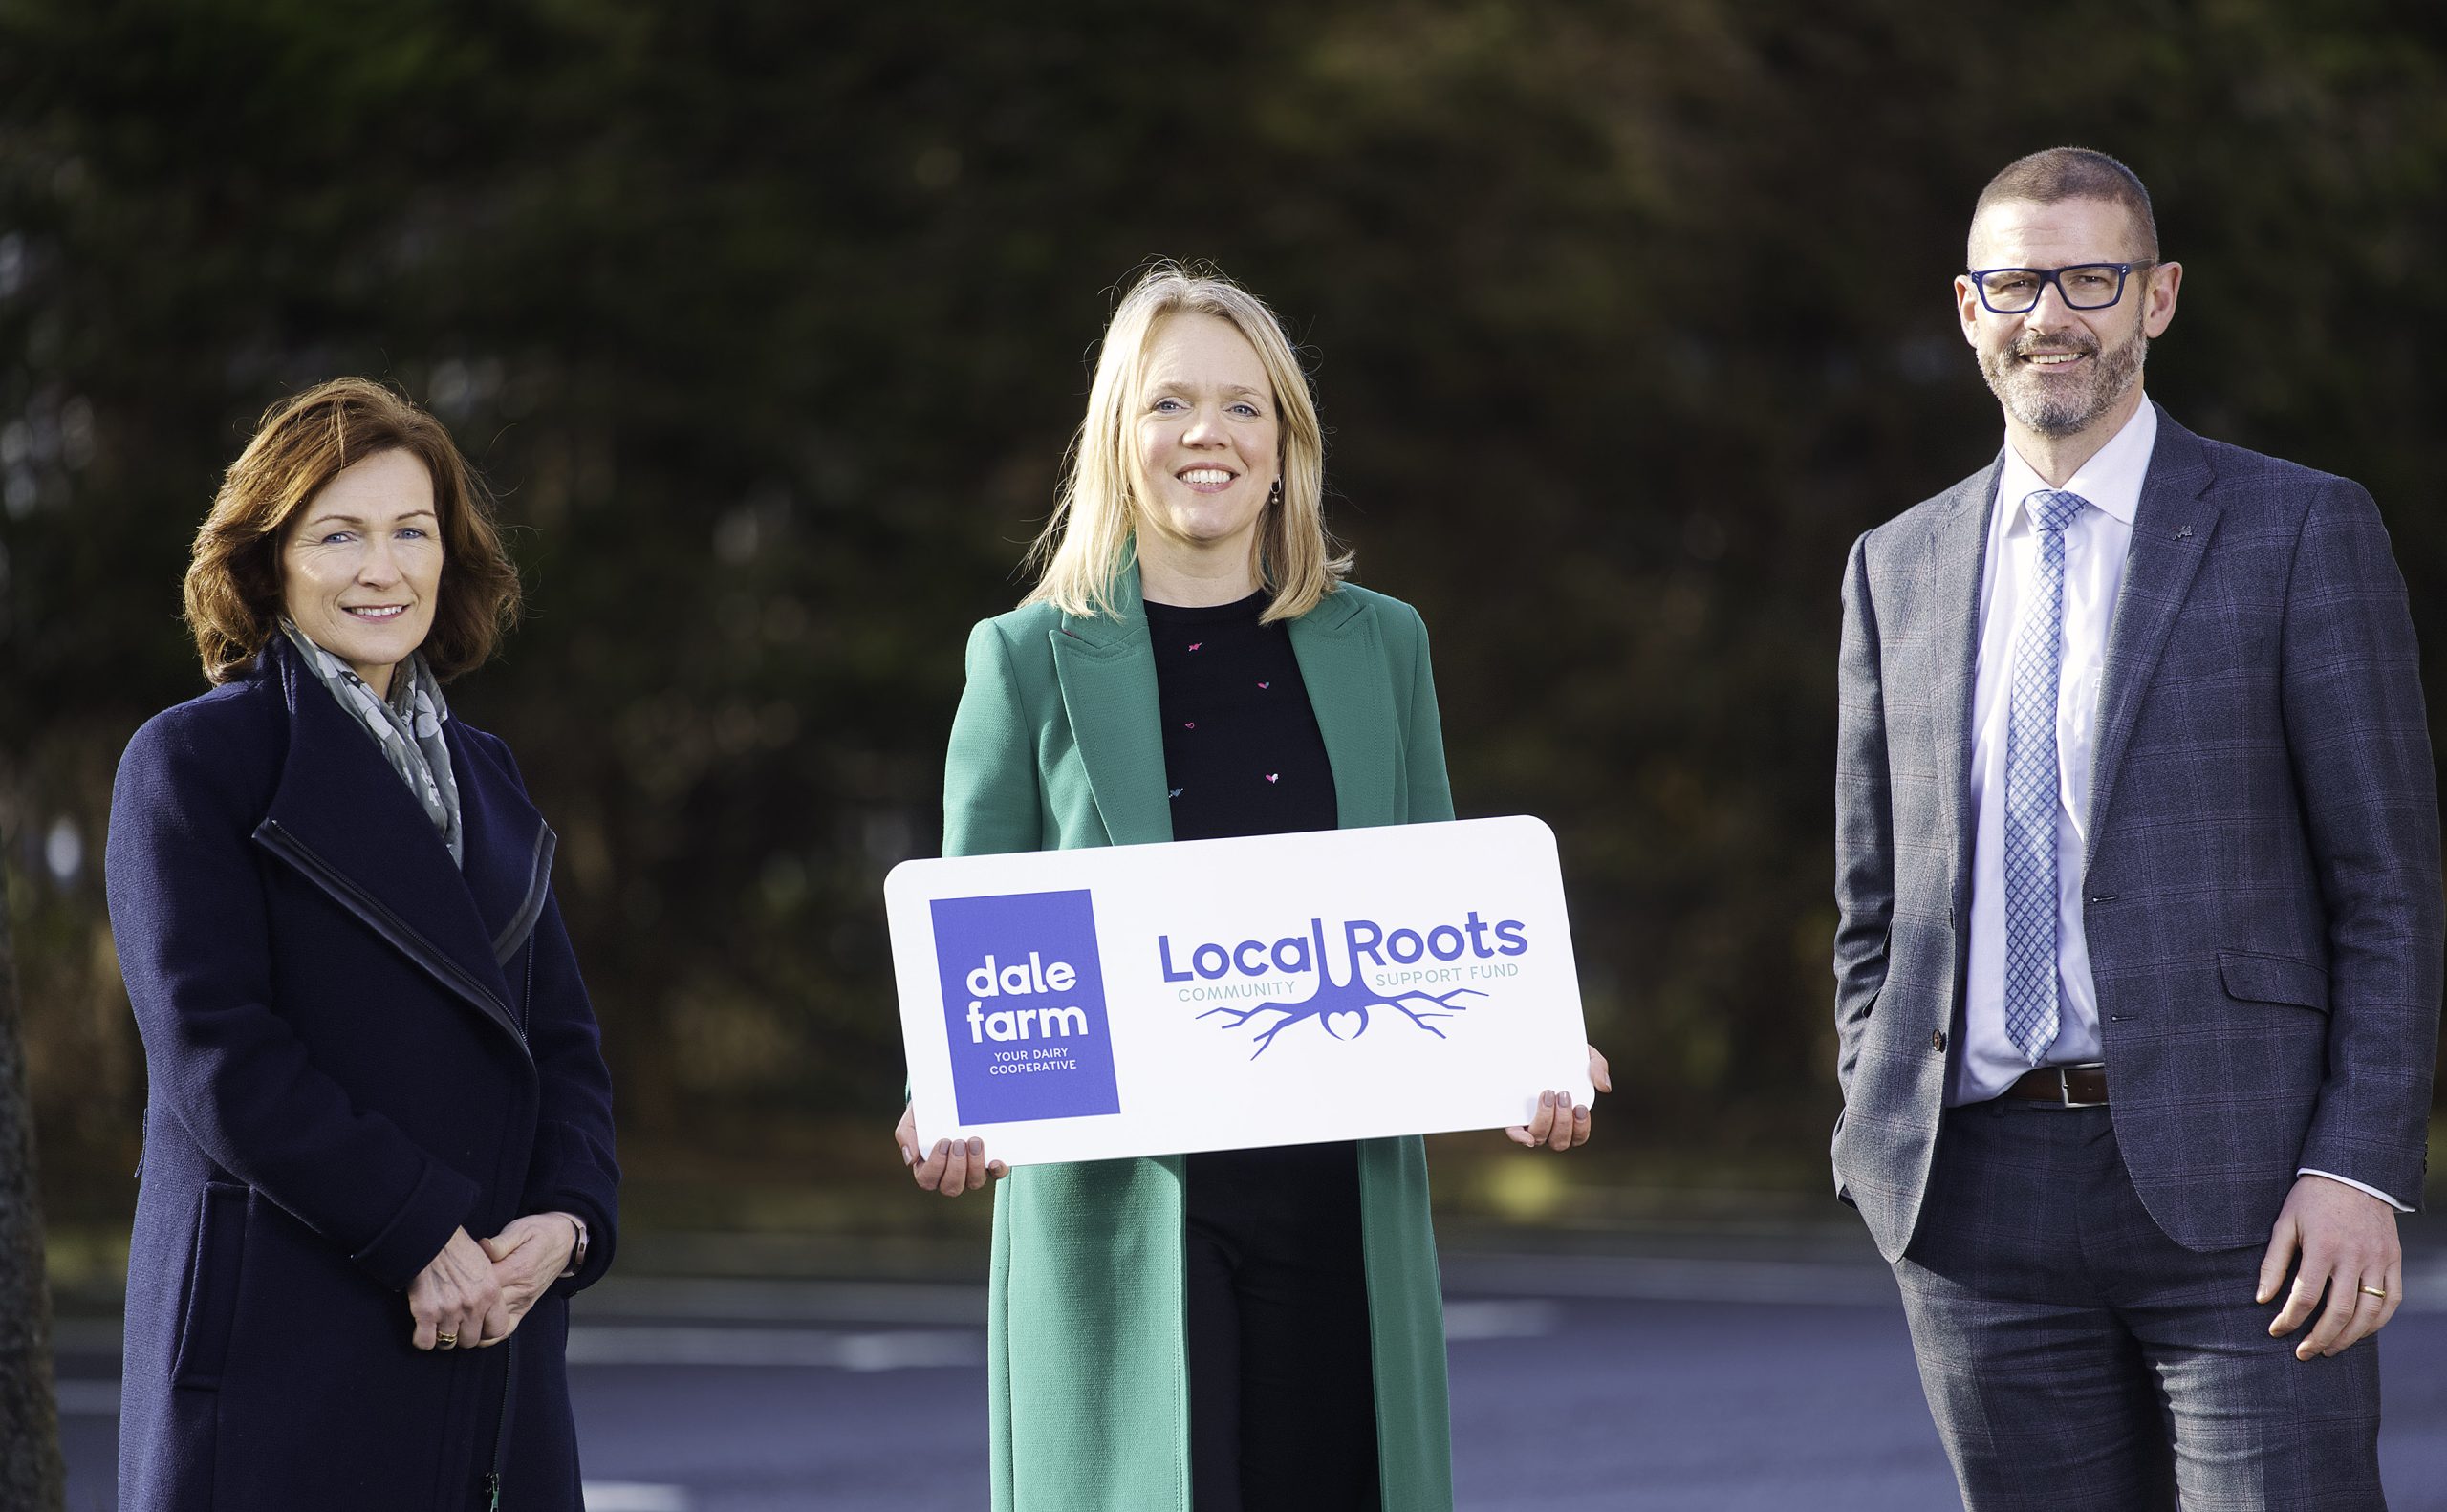 Dale Farm launches Local Roots Community Support Fund